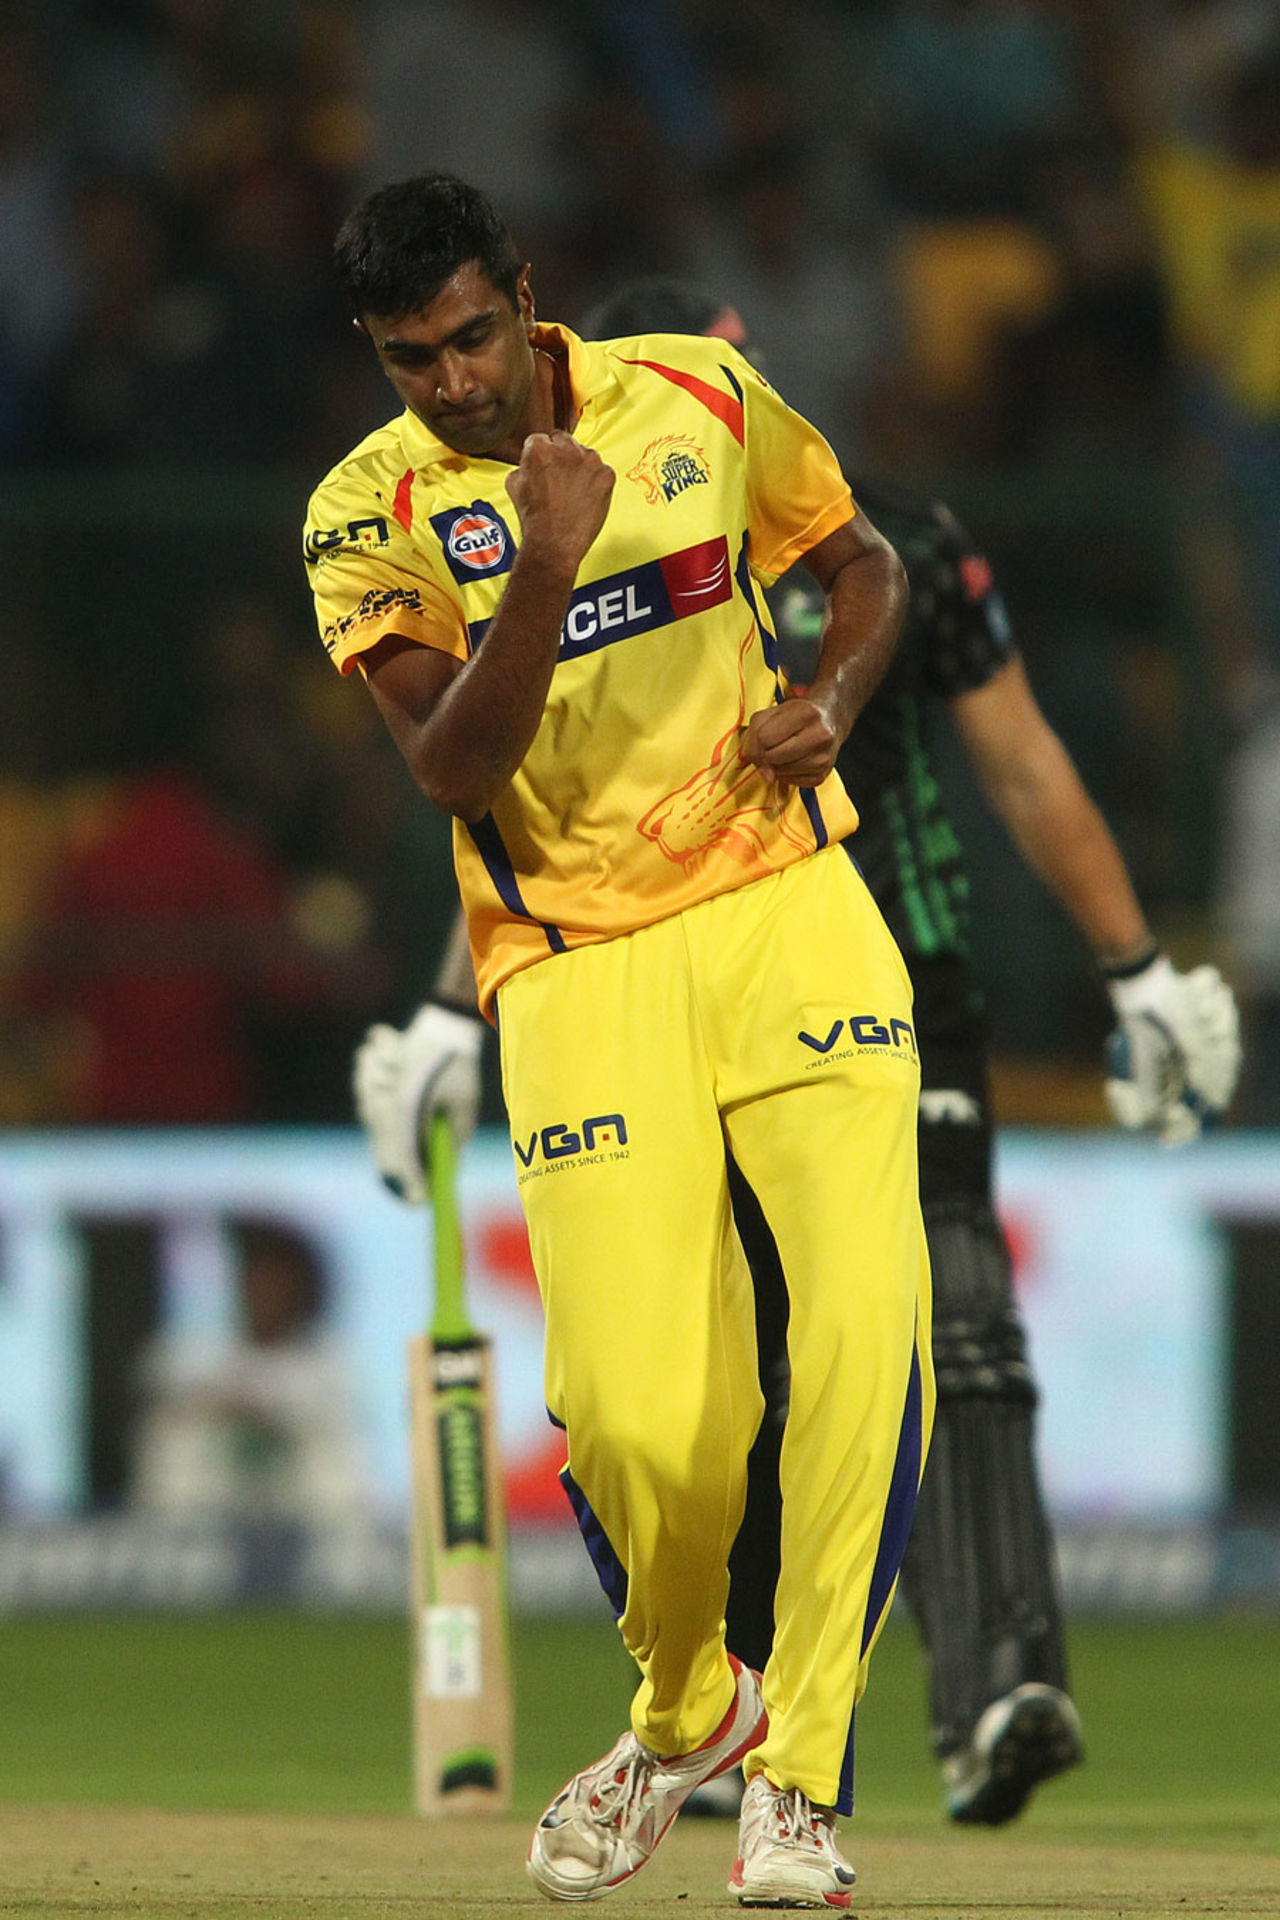 R Ashwin exults after getting Morne van Wyk lbw, Chennai Super Kings v Dolphins, CLT20, Group A, Bangalore, September 22, 2014